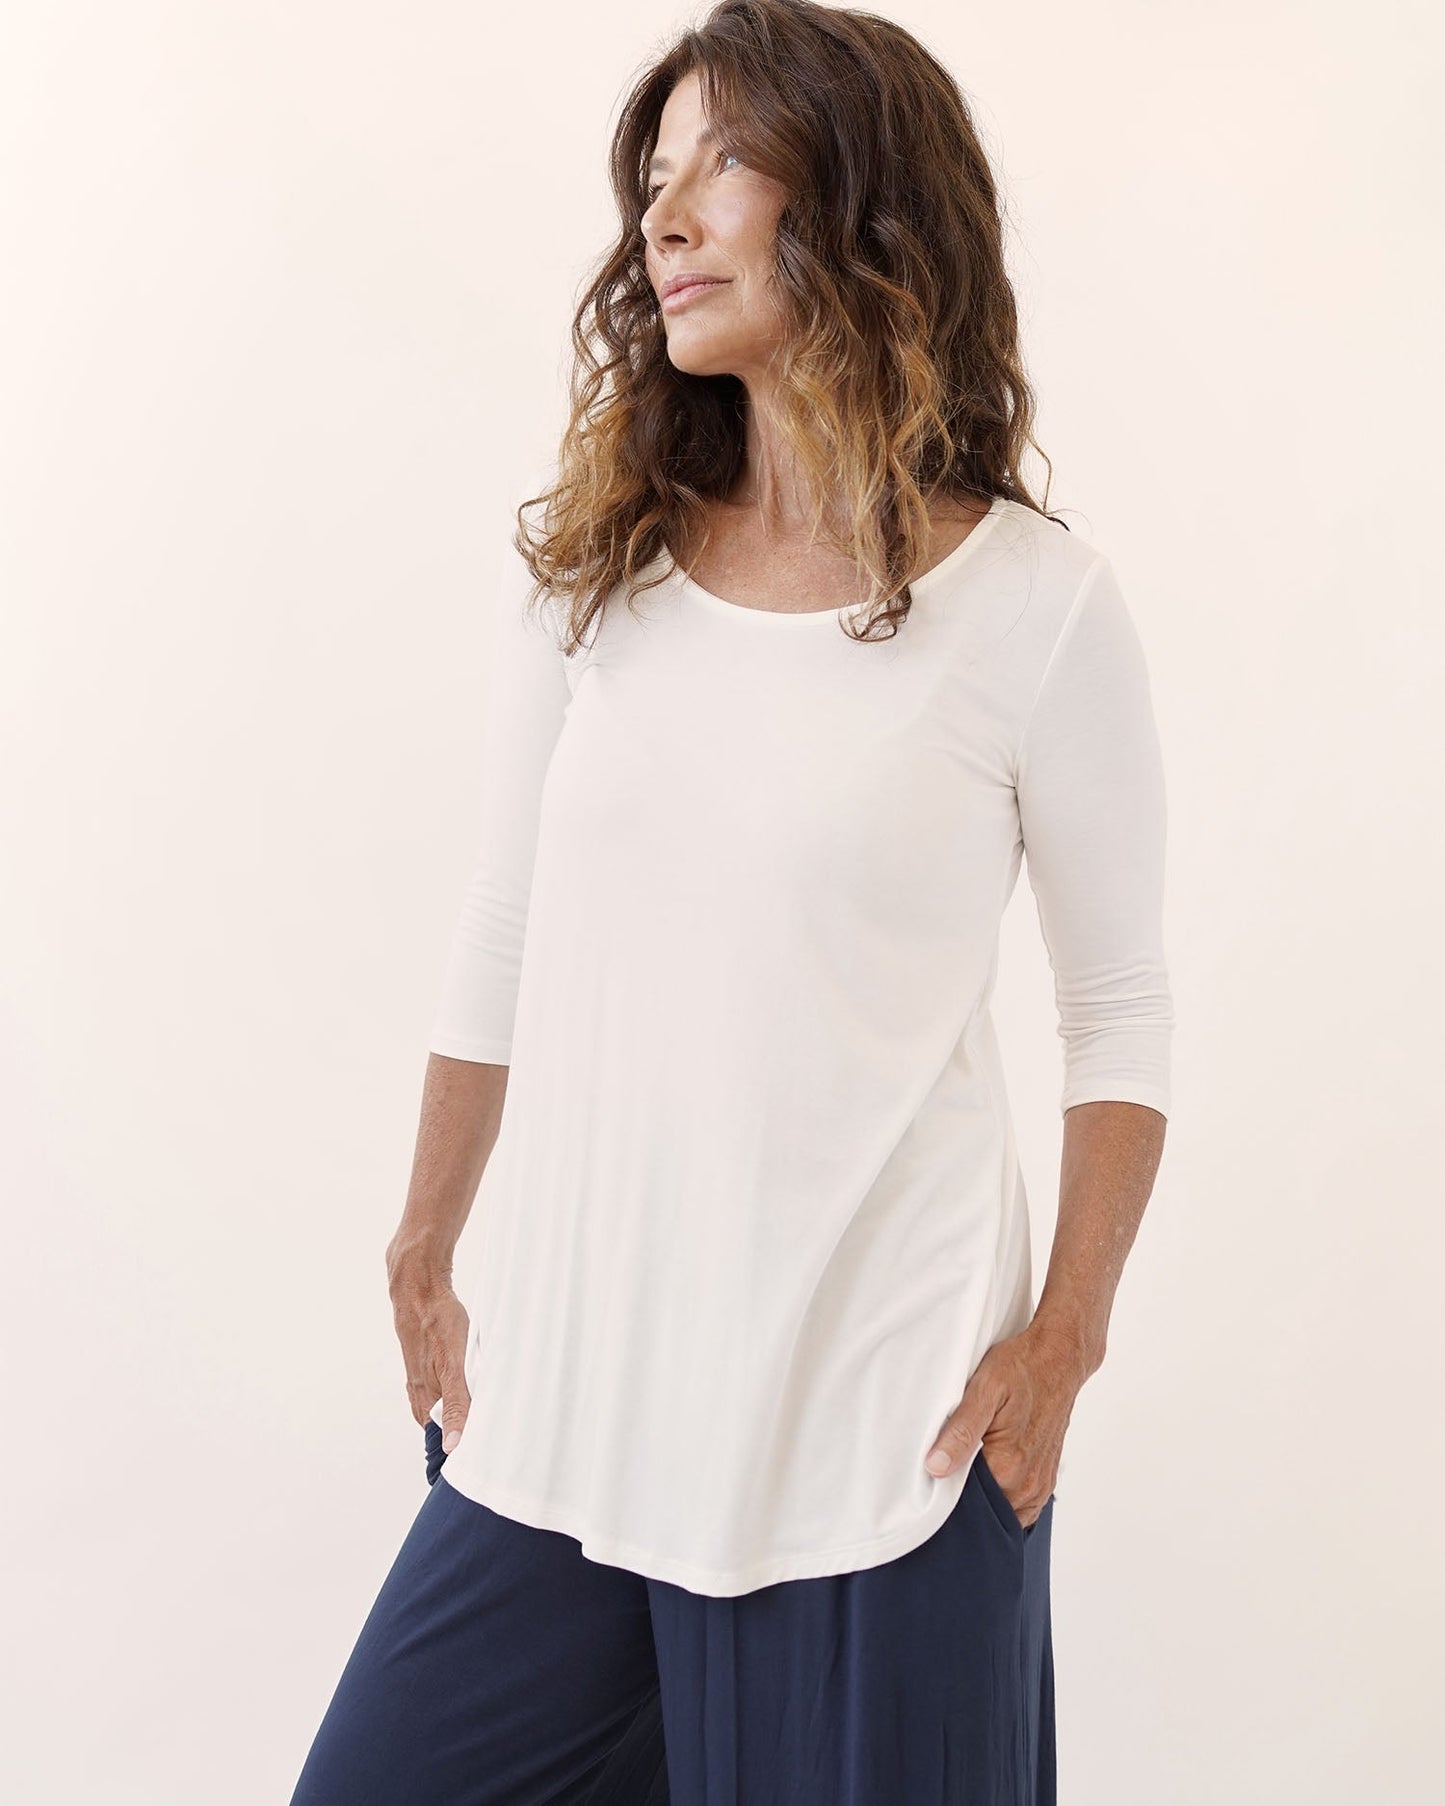 A bamboo ivory elbow tunic tshirt